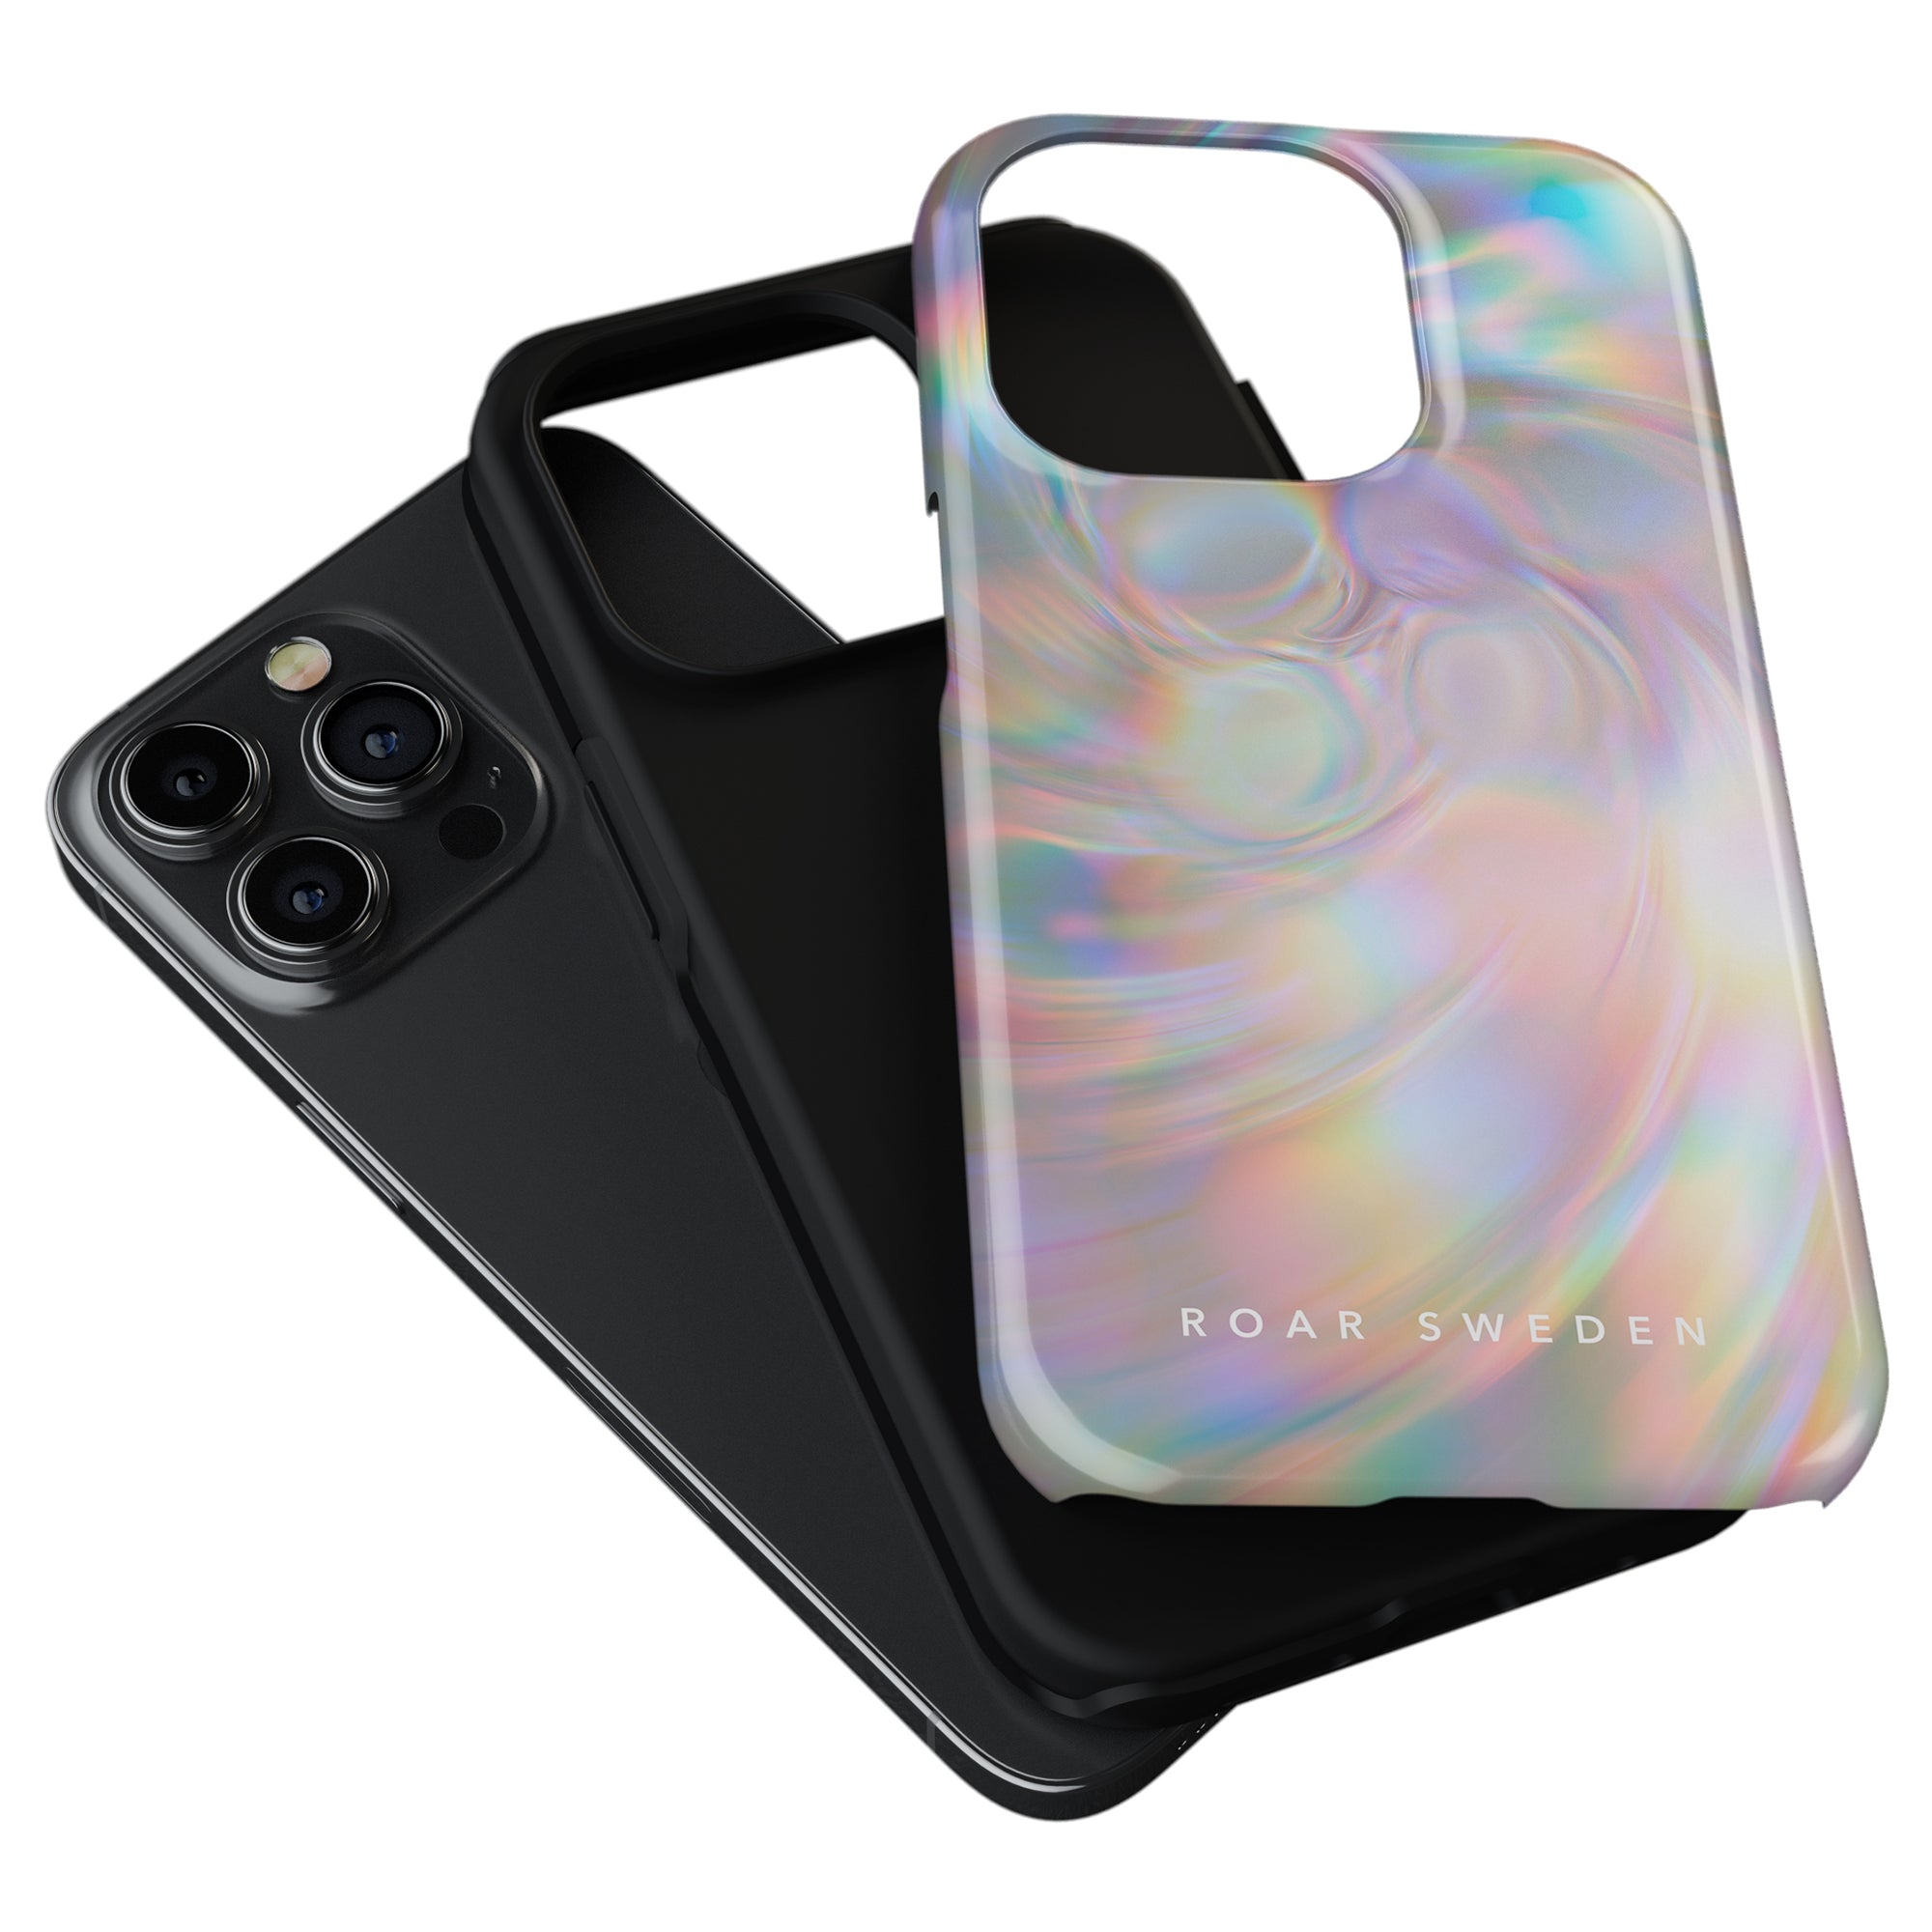 Two smartphone cases from the Oyster Collection; one black and one with a Pearlescent - Tough Case, both designed for models with triple-camera setups.